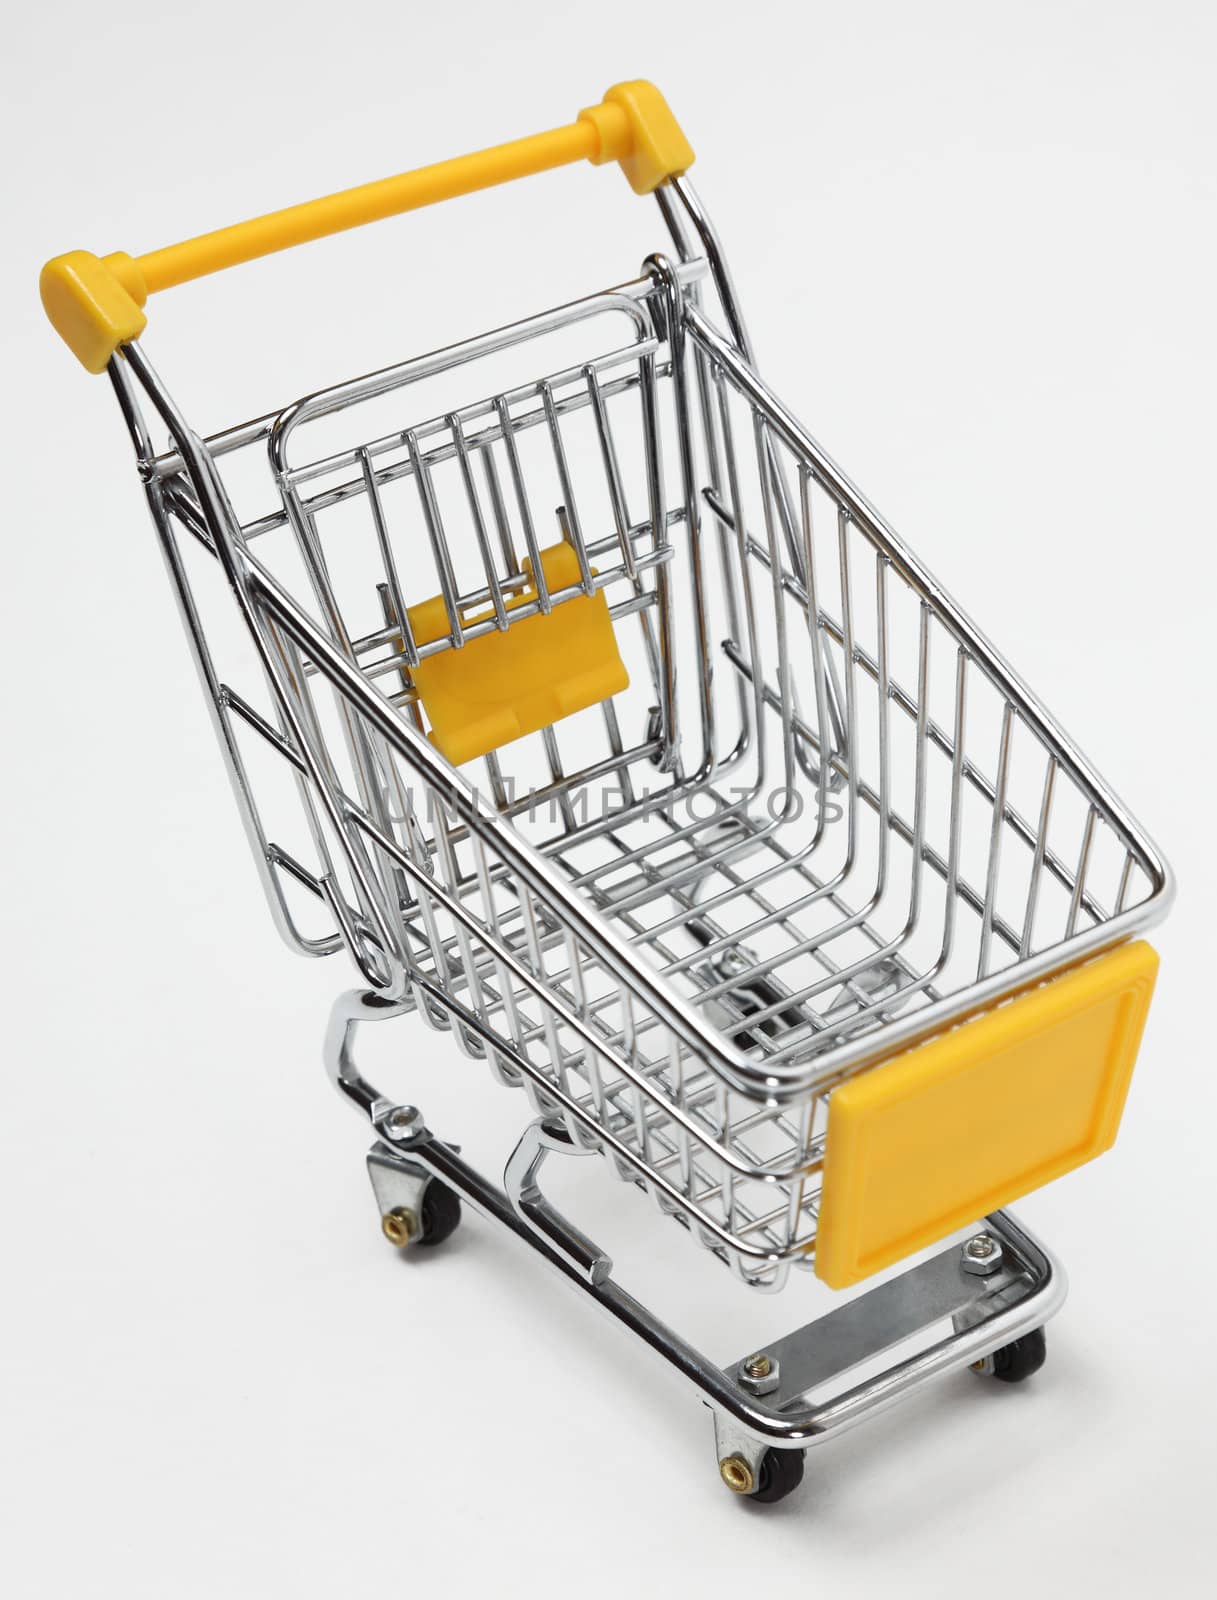 Image of an empty shopping cart against a white background